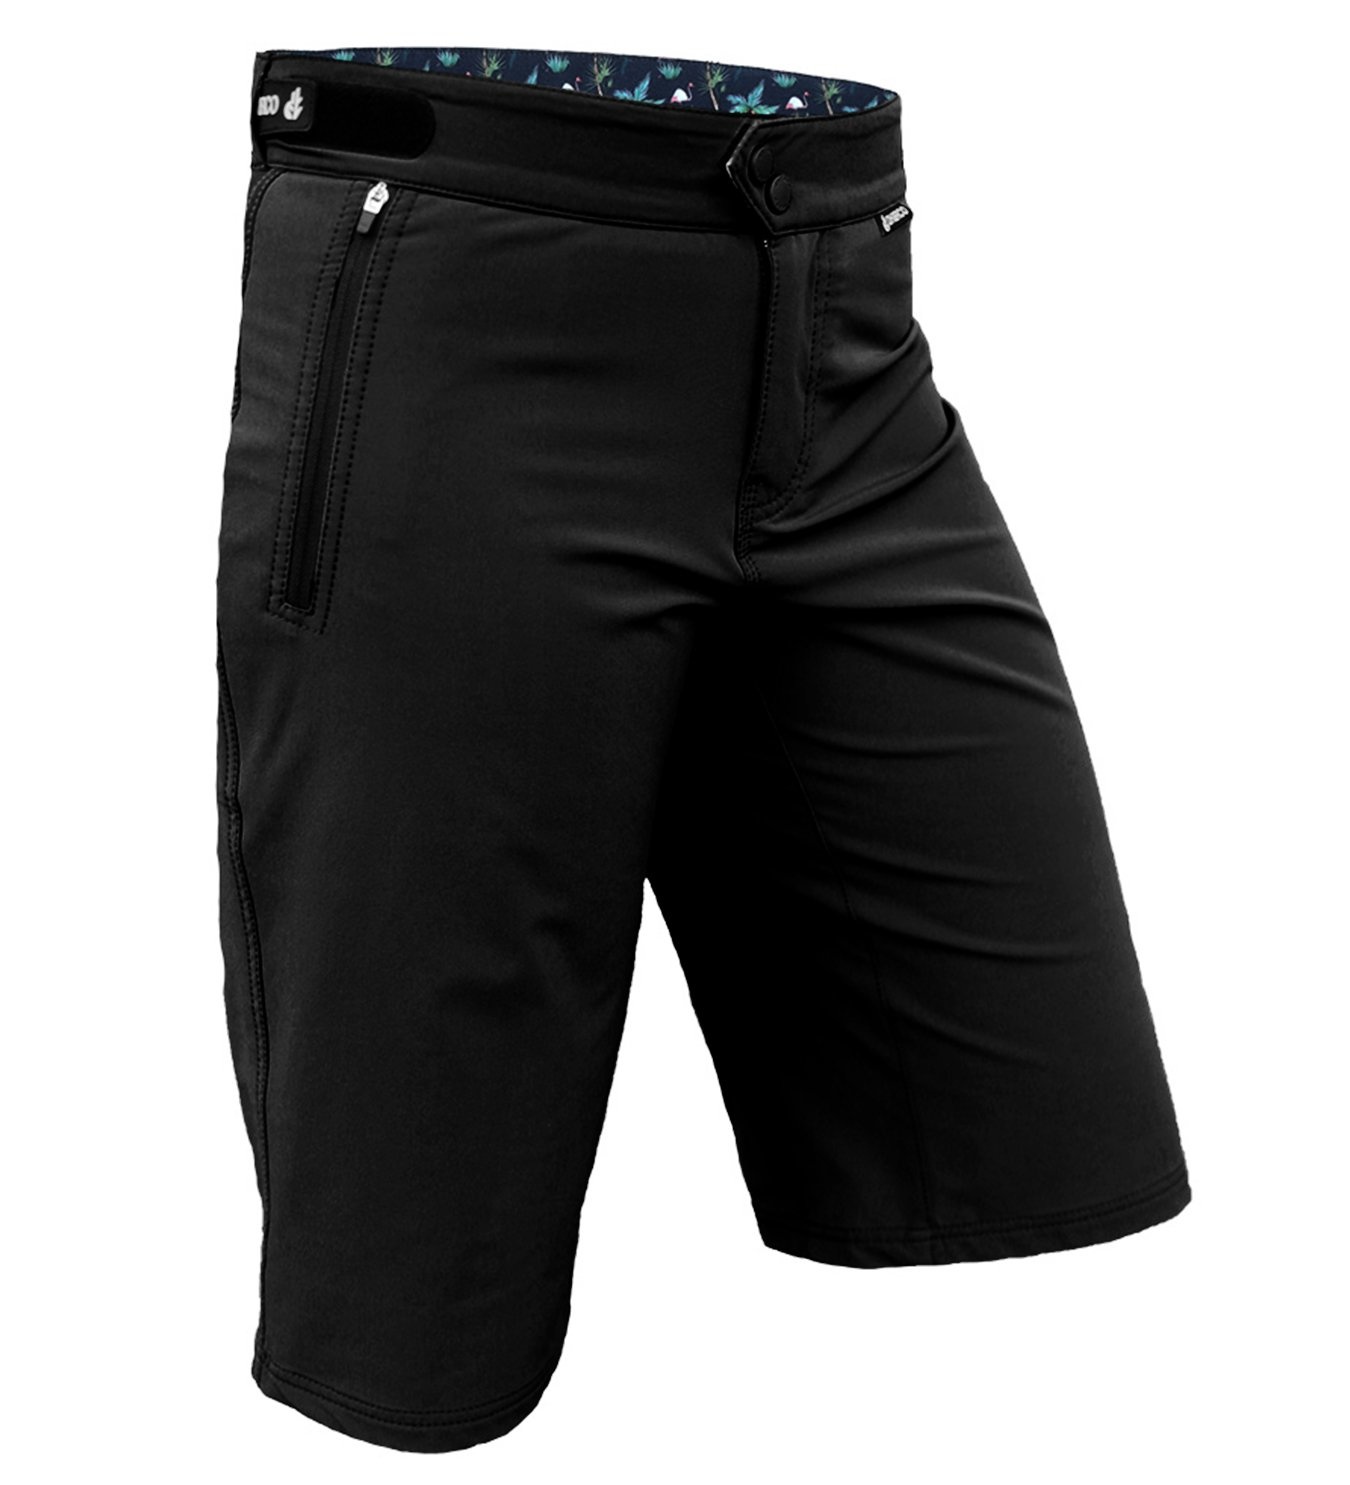 DHaRCO Women's Gravity Shorts - Cyclery Northside